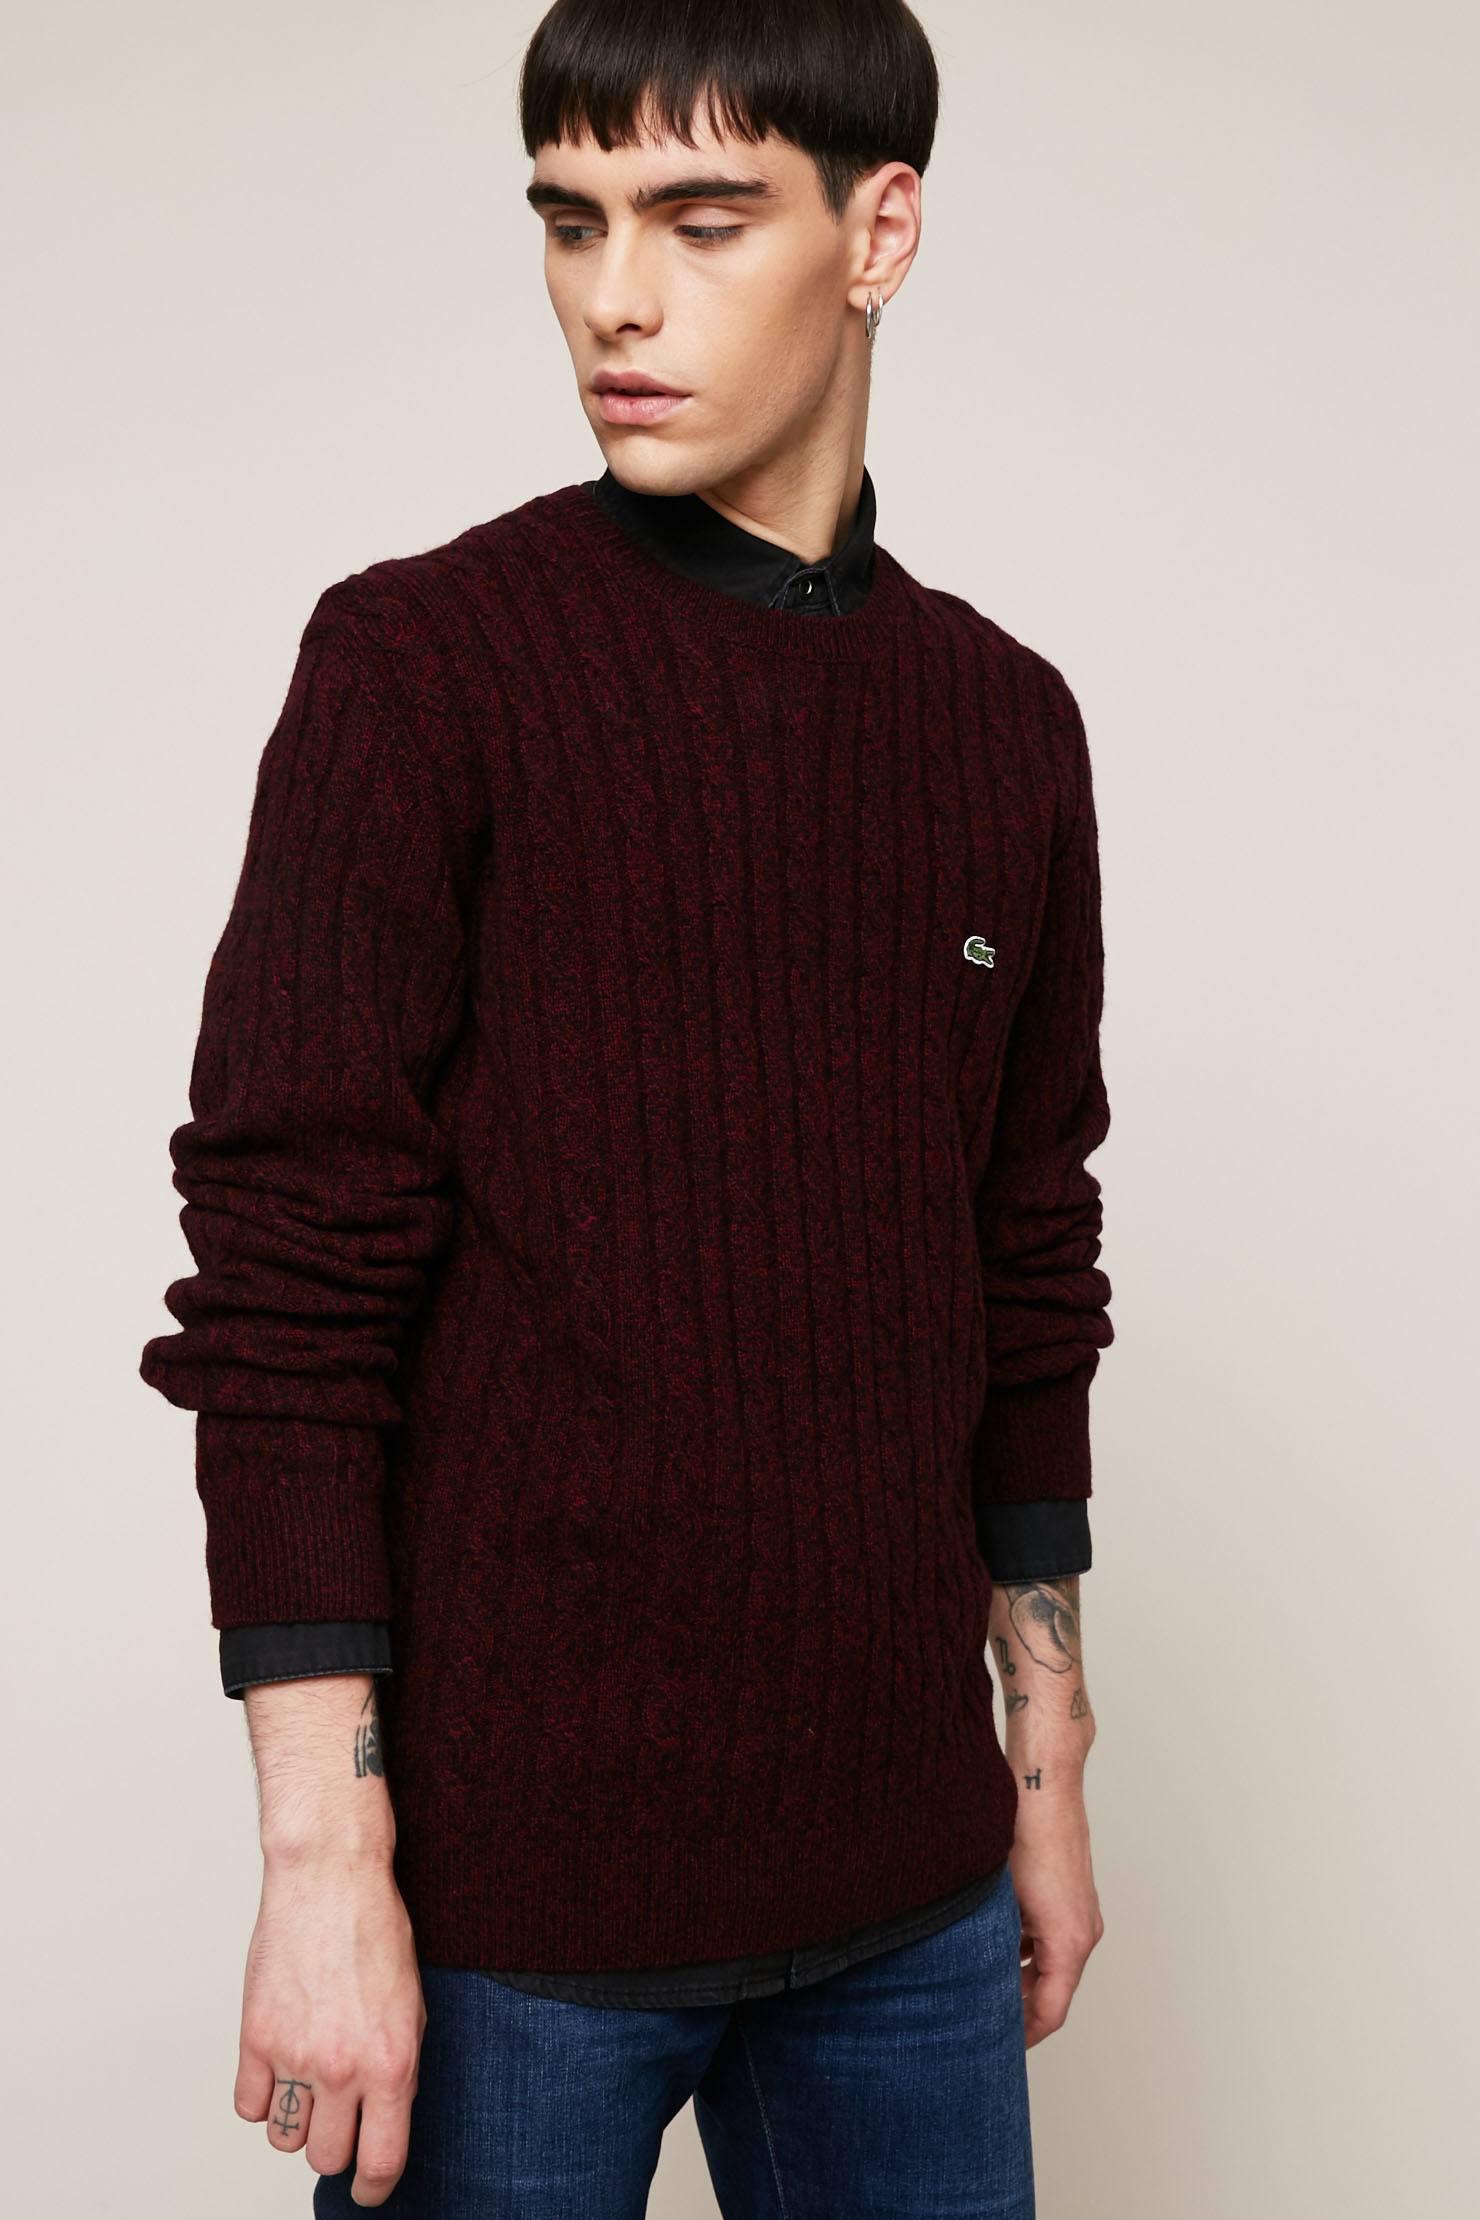 Lyst - Lacoste Sweater & Cardigan in Red for Men